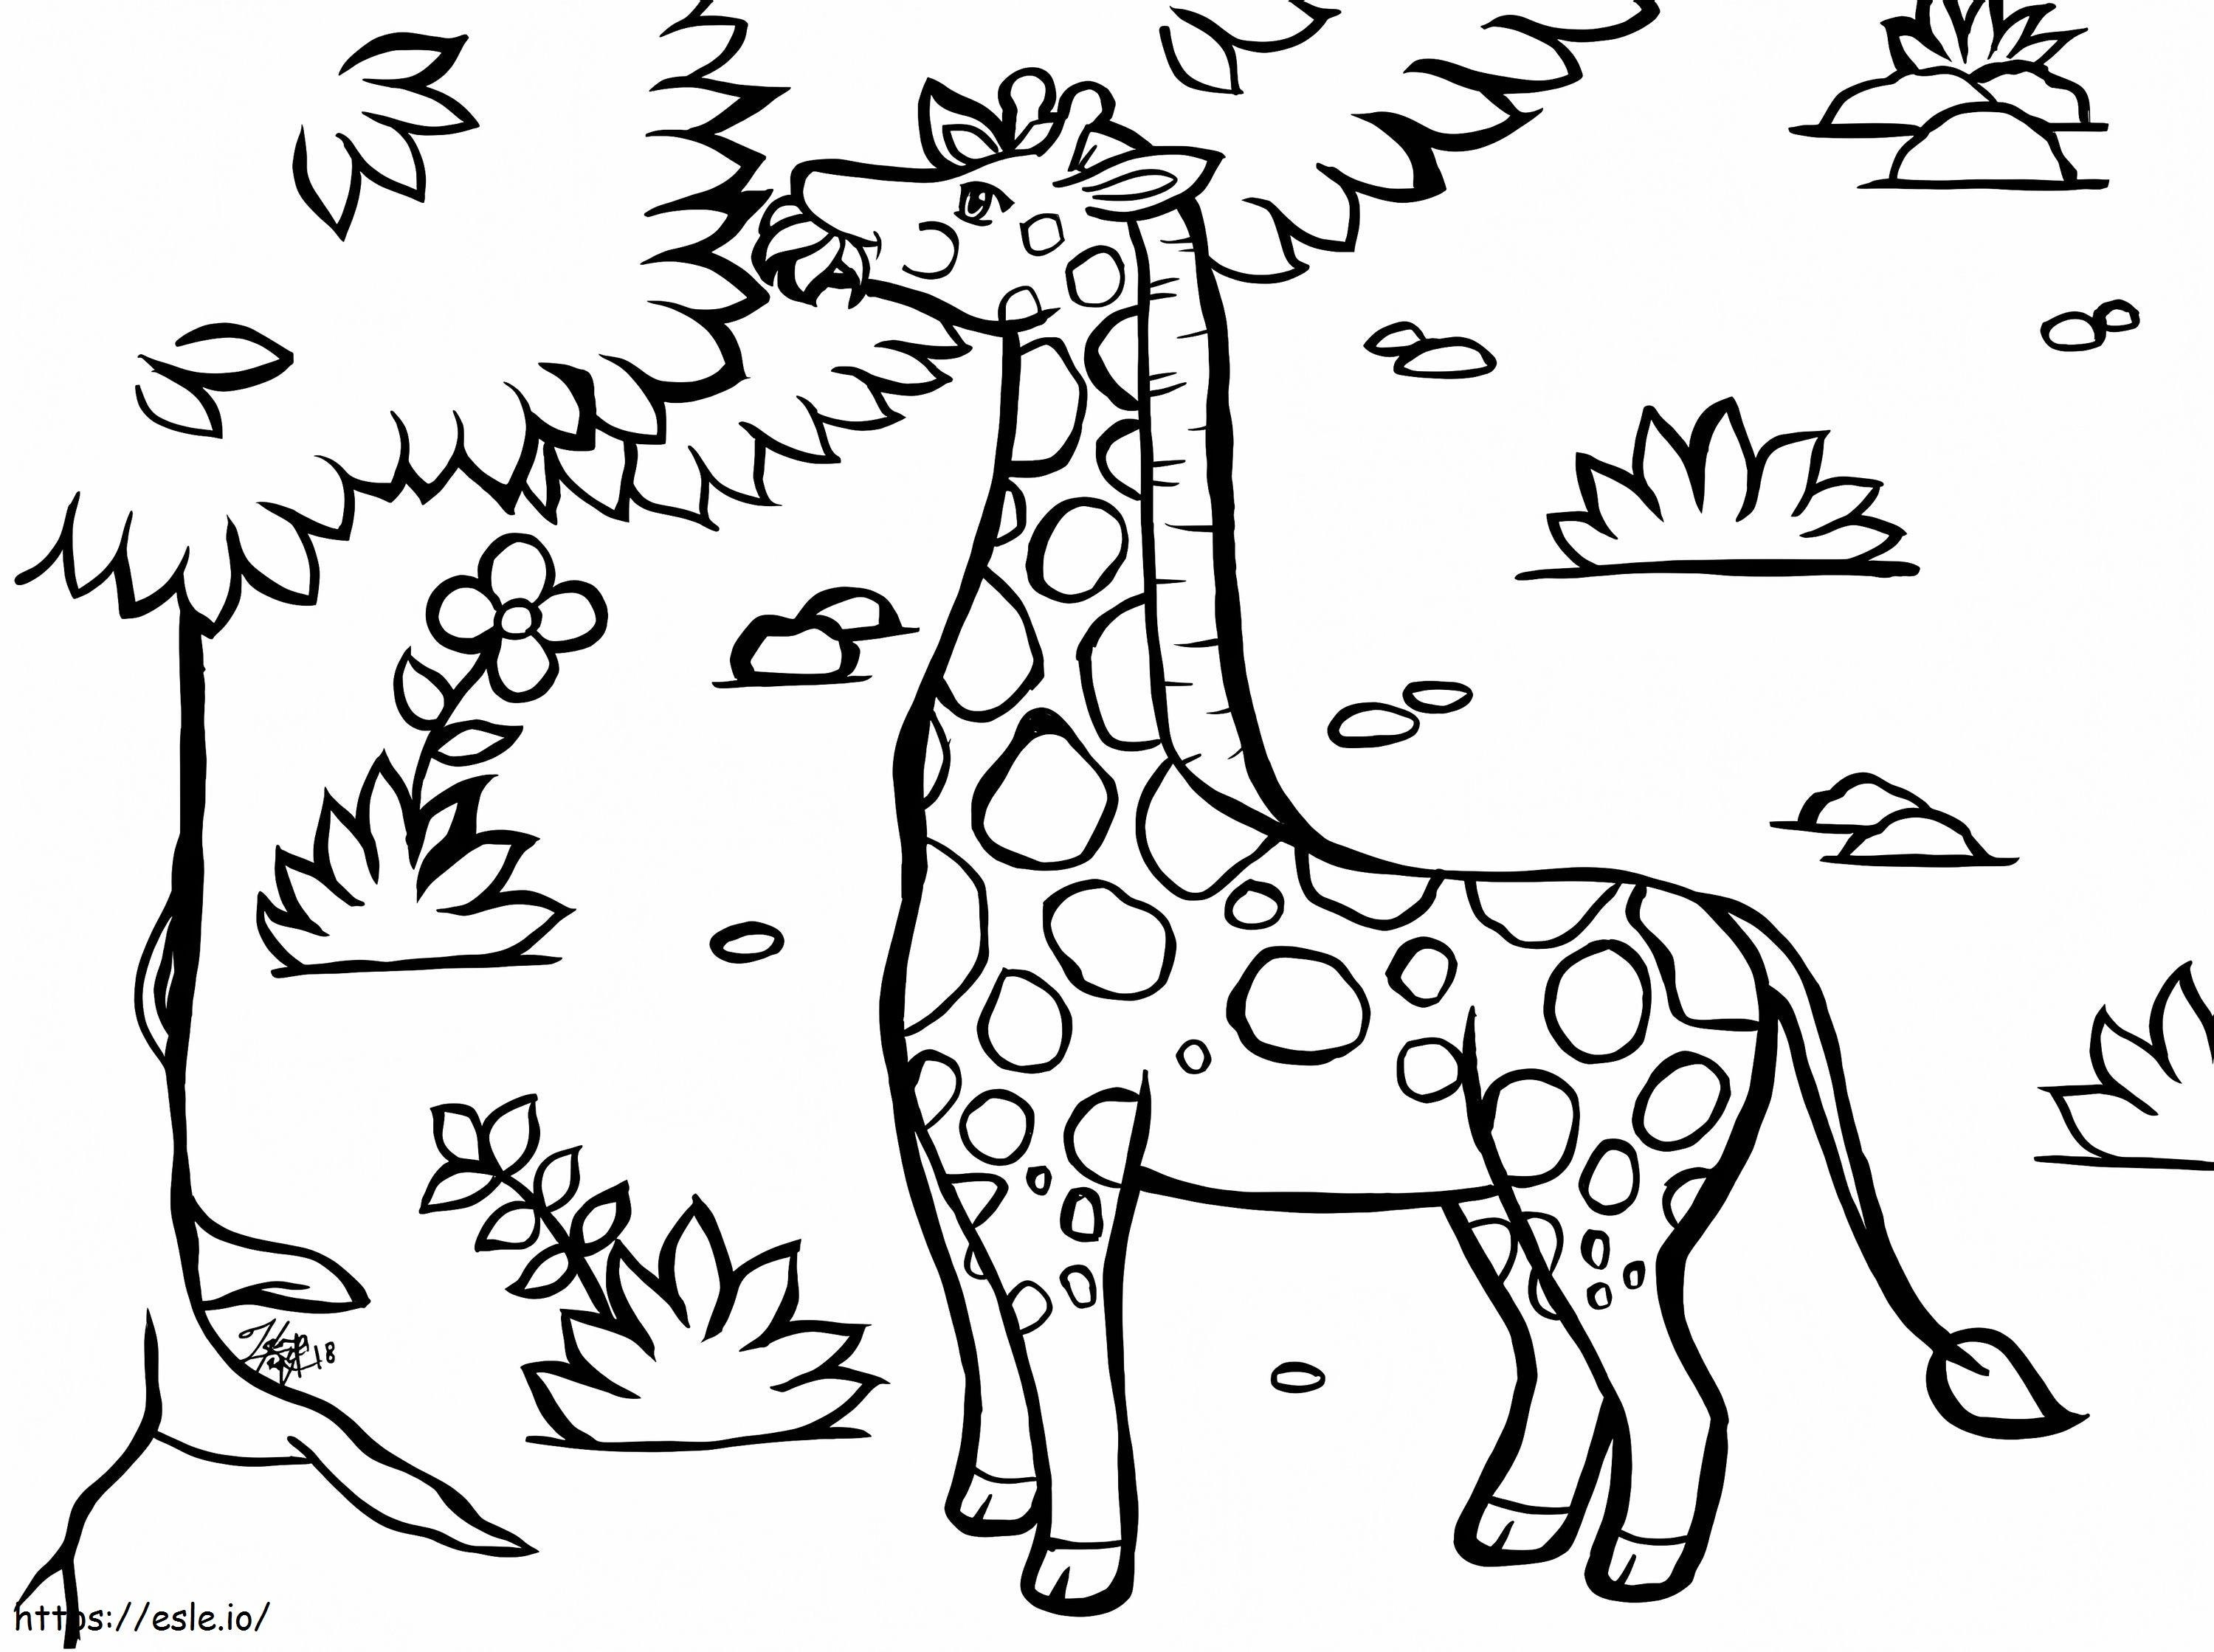 Giraffe To Print coloring page